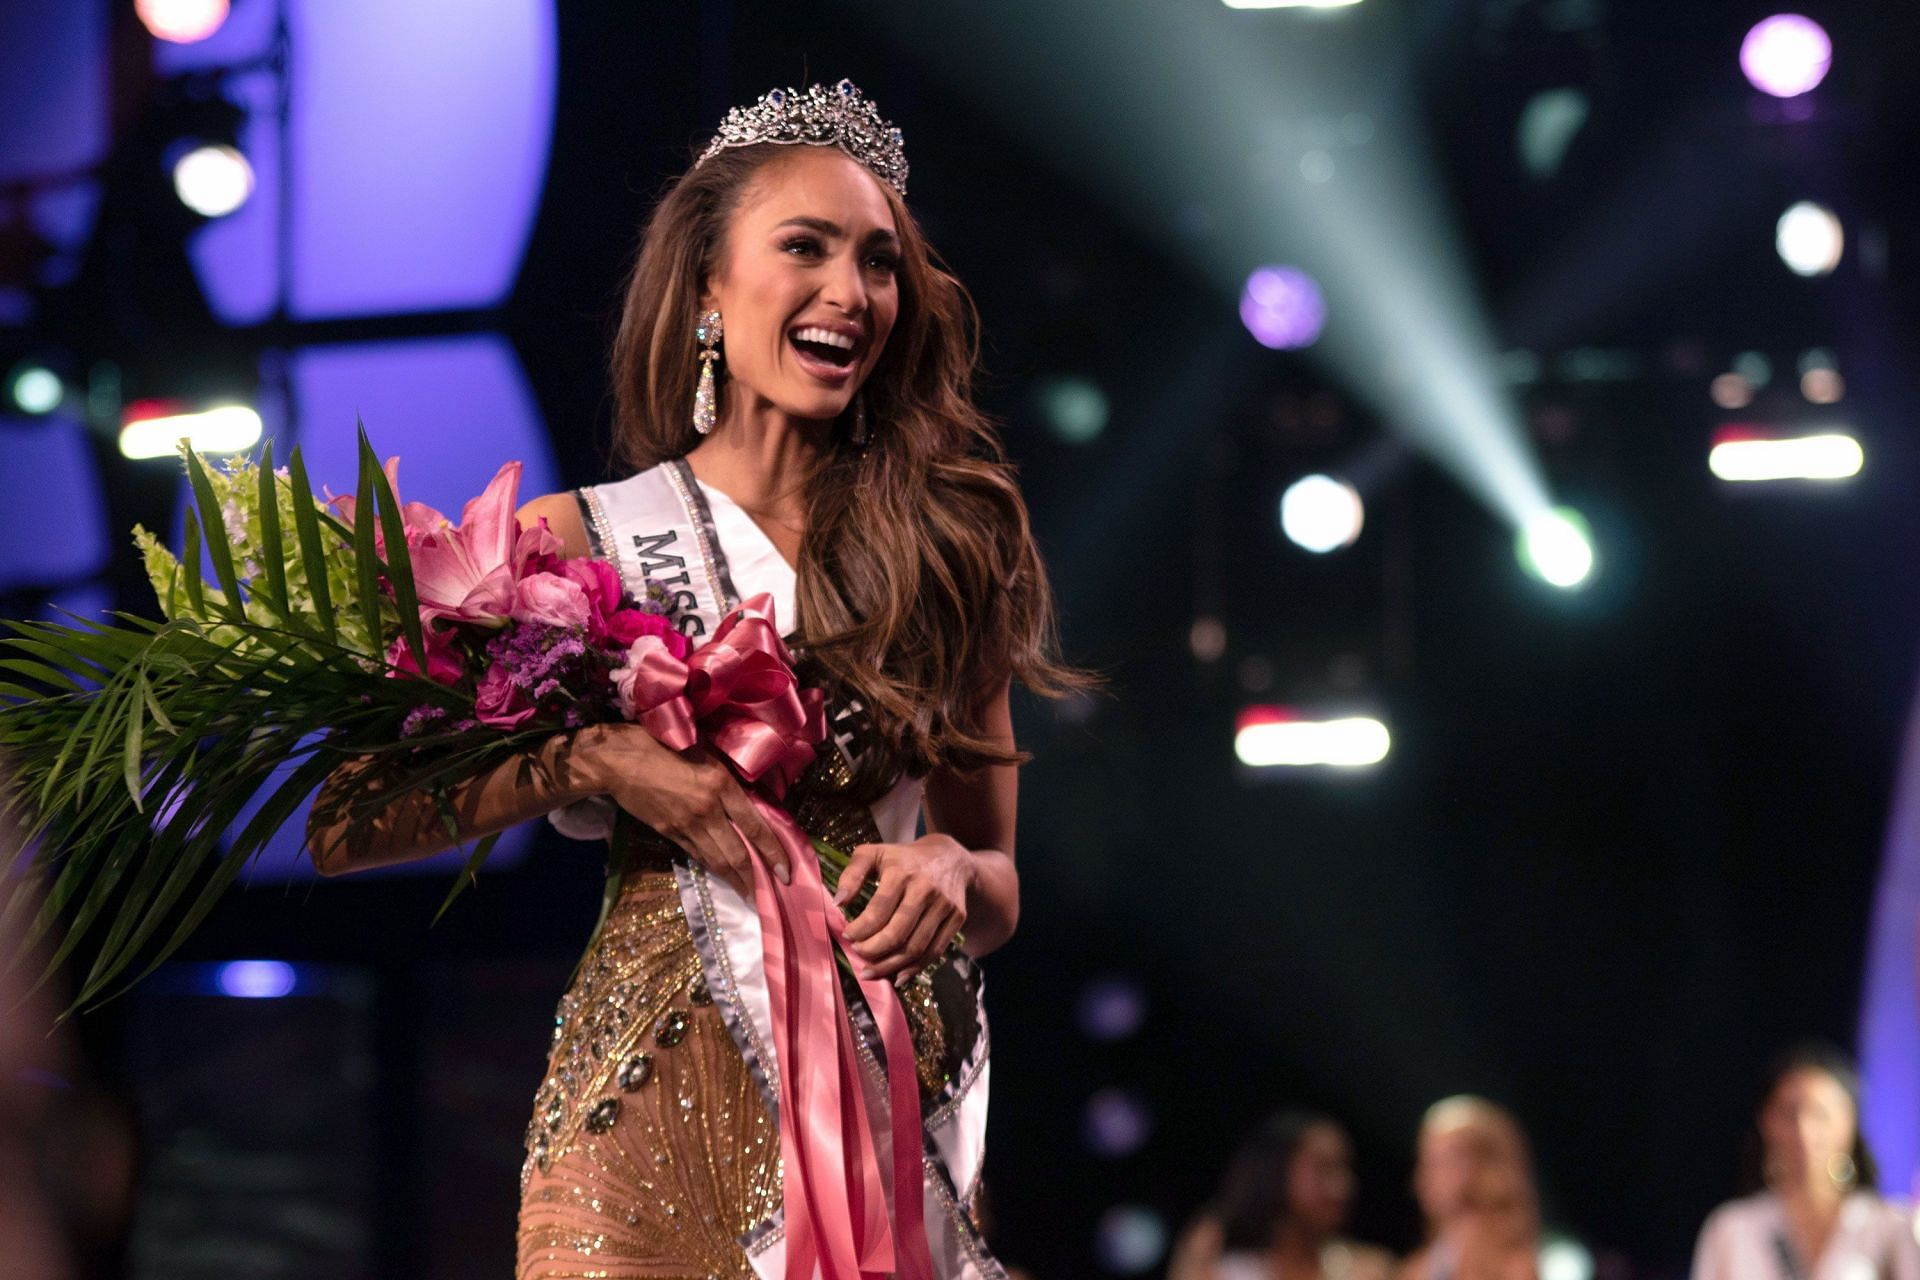 Was Miss USA 2022 staged? Details and more explored about the whole fiasco as Miss Universe begins investigations. (Image via Miss USA)